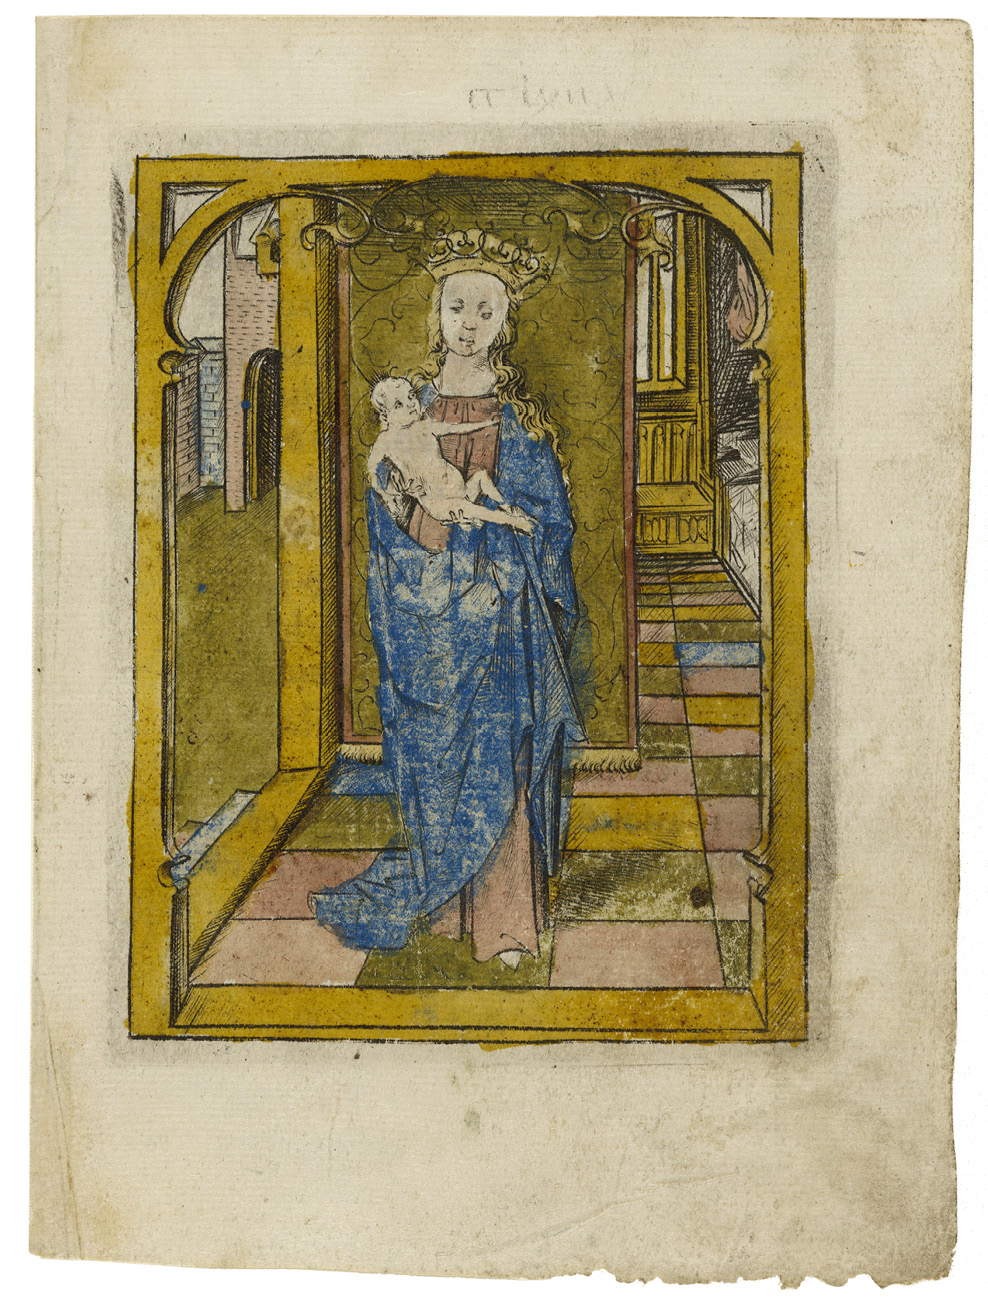 Fig. 34  Leaf from the beghards’ book of hours, with an engraving depicting the Virgin and Child, by Israhel van Meckenem. London, British Museum, Department of Prints & Drawings, inv. 1861,1109.633.